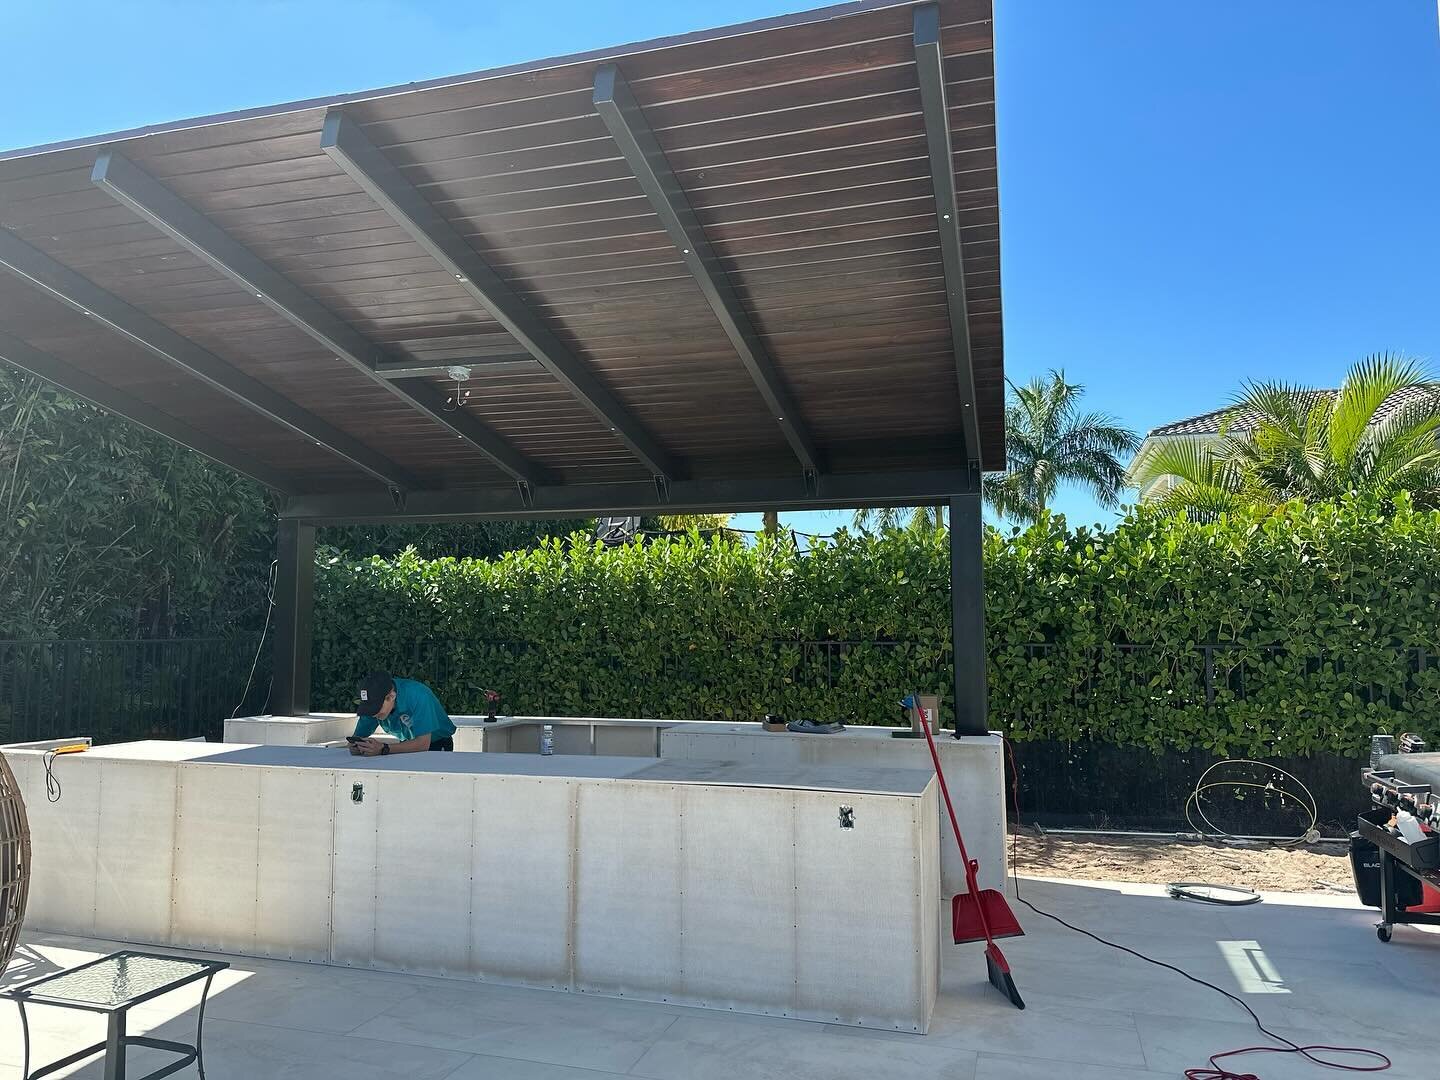 A work of art in progress! This customer stained the tongue and groove roof in a darker shade and it looks fantastic. We love helping you create the perfect shade for your outdoor space!